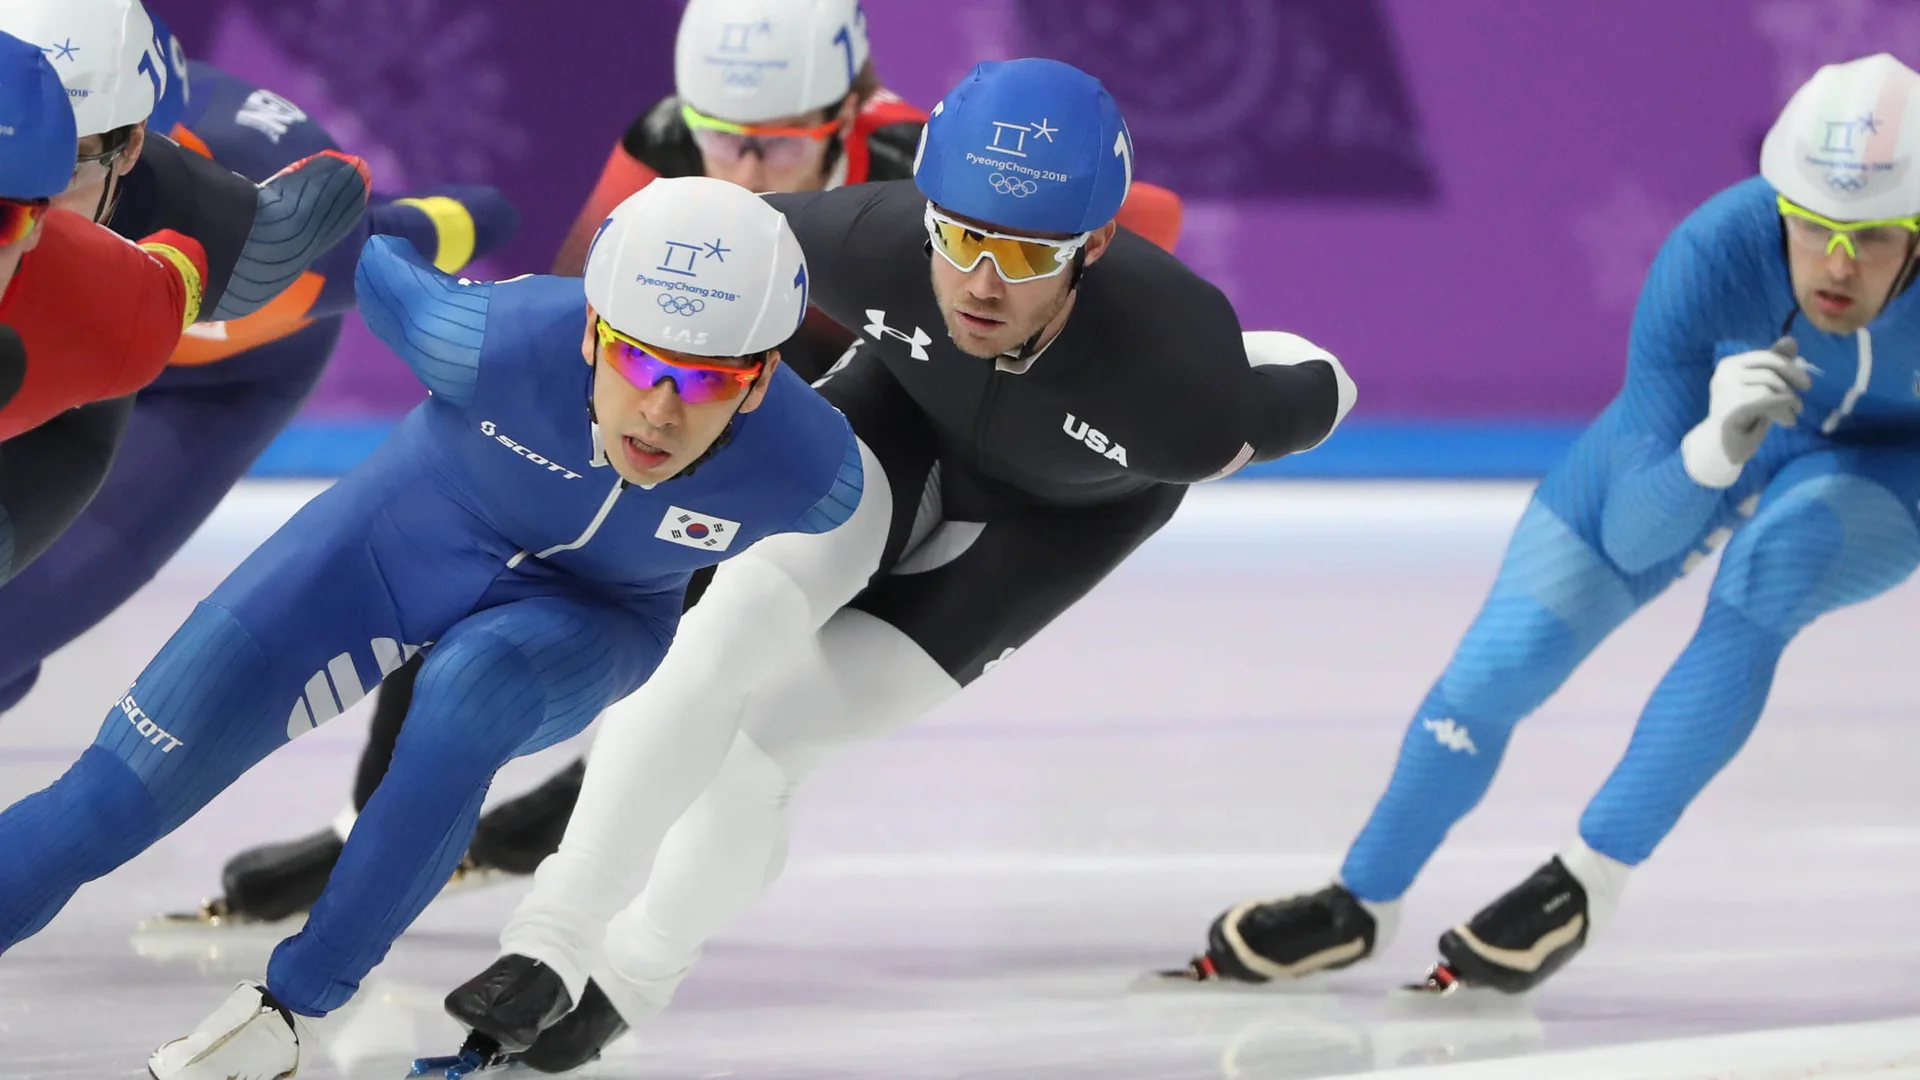 How to watch: Mass start events cap speed skating competition at 2022 Winter Olympics